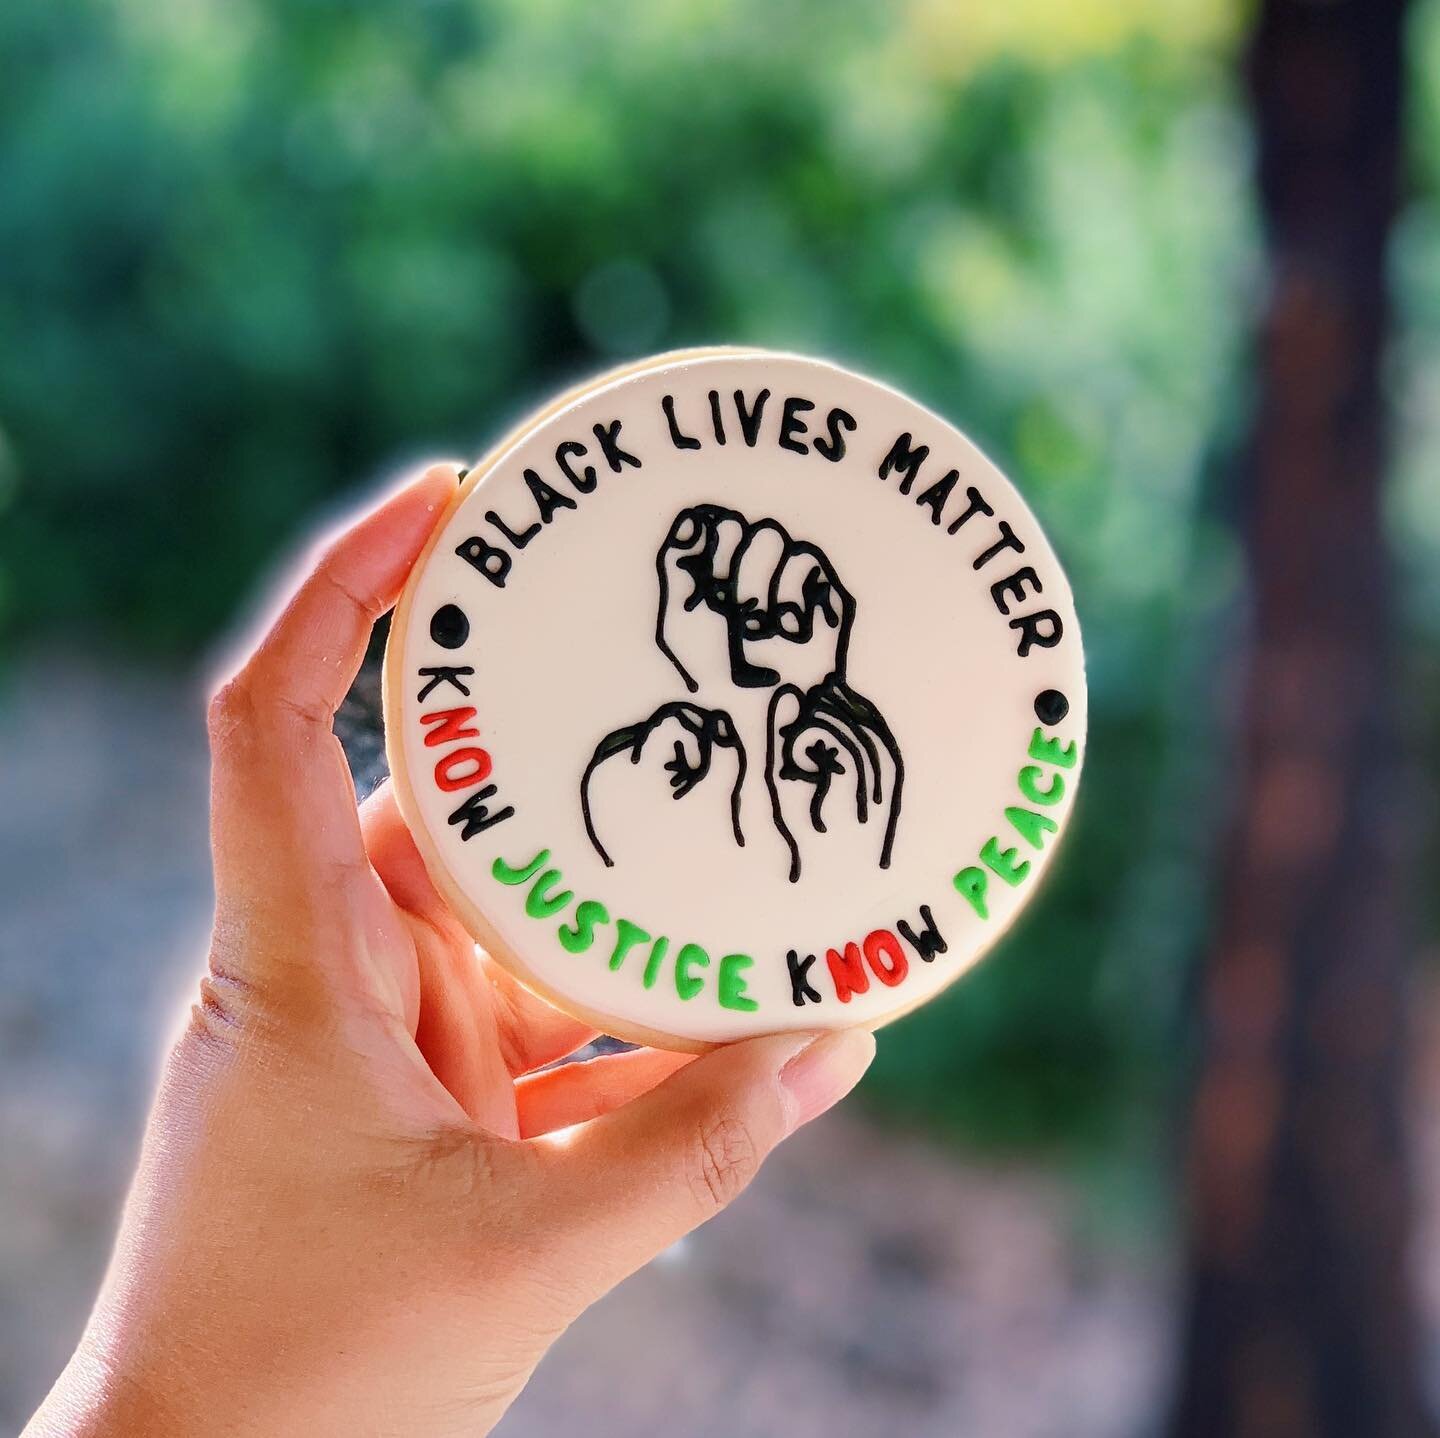 Black Lives Mattered in the past. Black Lives Matter currently. And Black Lives Matter in the future. Because until everyone sees that Black Lives Matter, all lives cannot matter. So for the month of September, I will not be taking any custom orders 